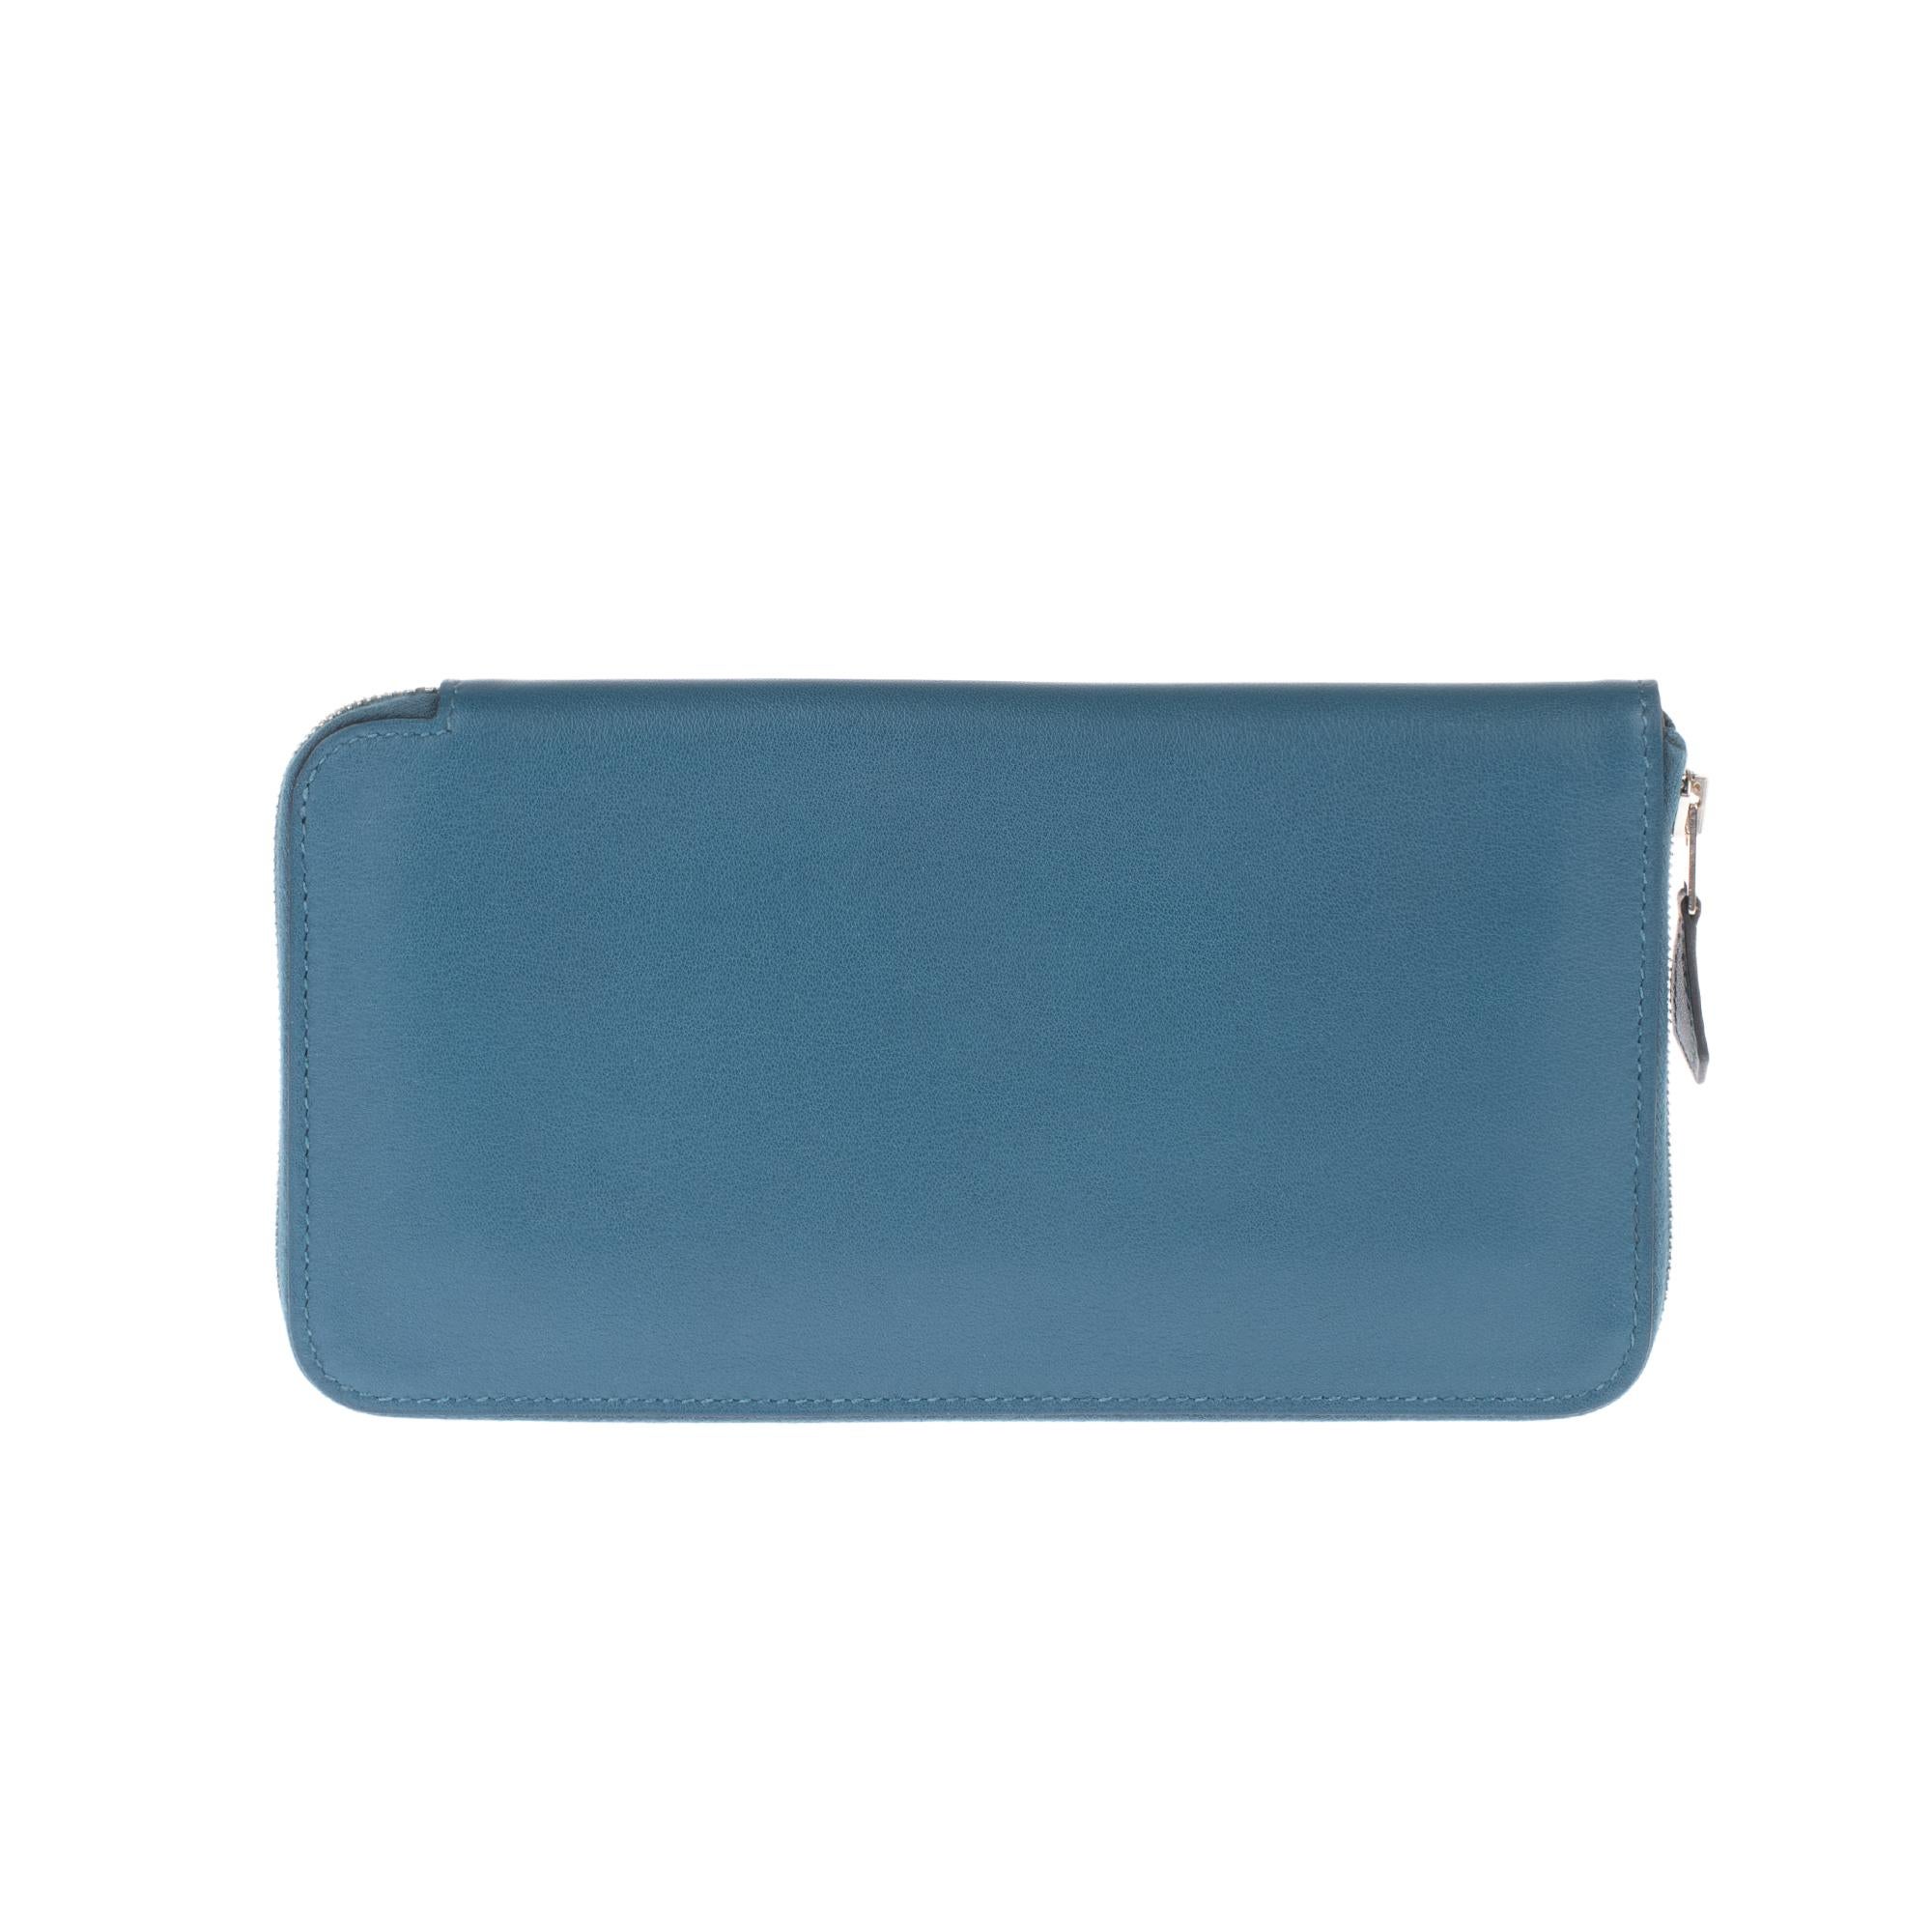 Elegant Hermès Azap wallet in blue smooth leather, palladium metal trim, carried by hand.

Zip closure.
Blue leather inner lining, 3 compartments including one zipped, 12 card slots.
Signature: 